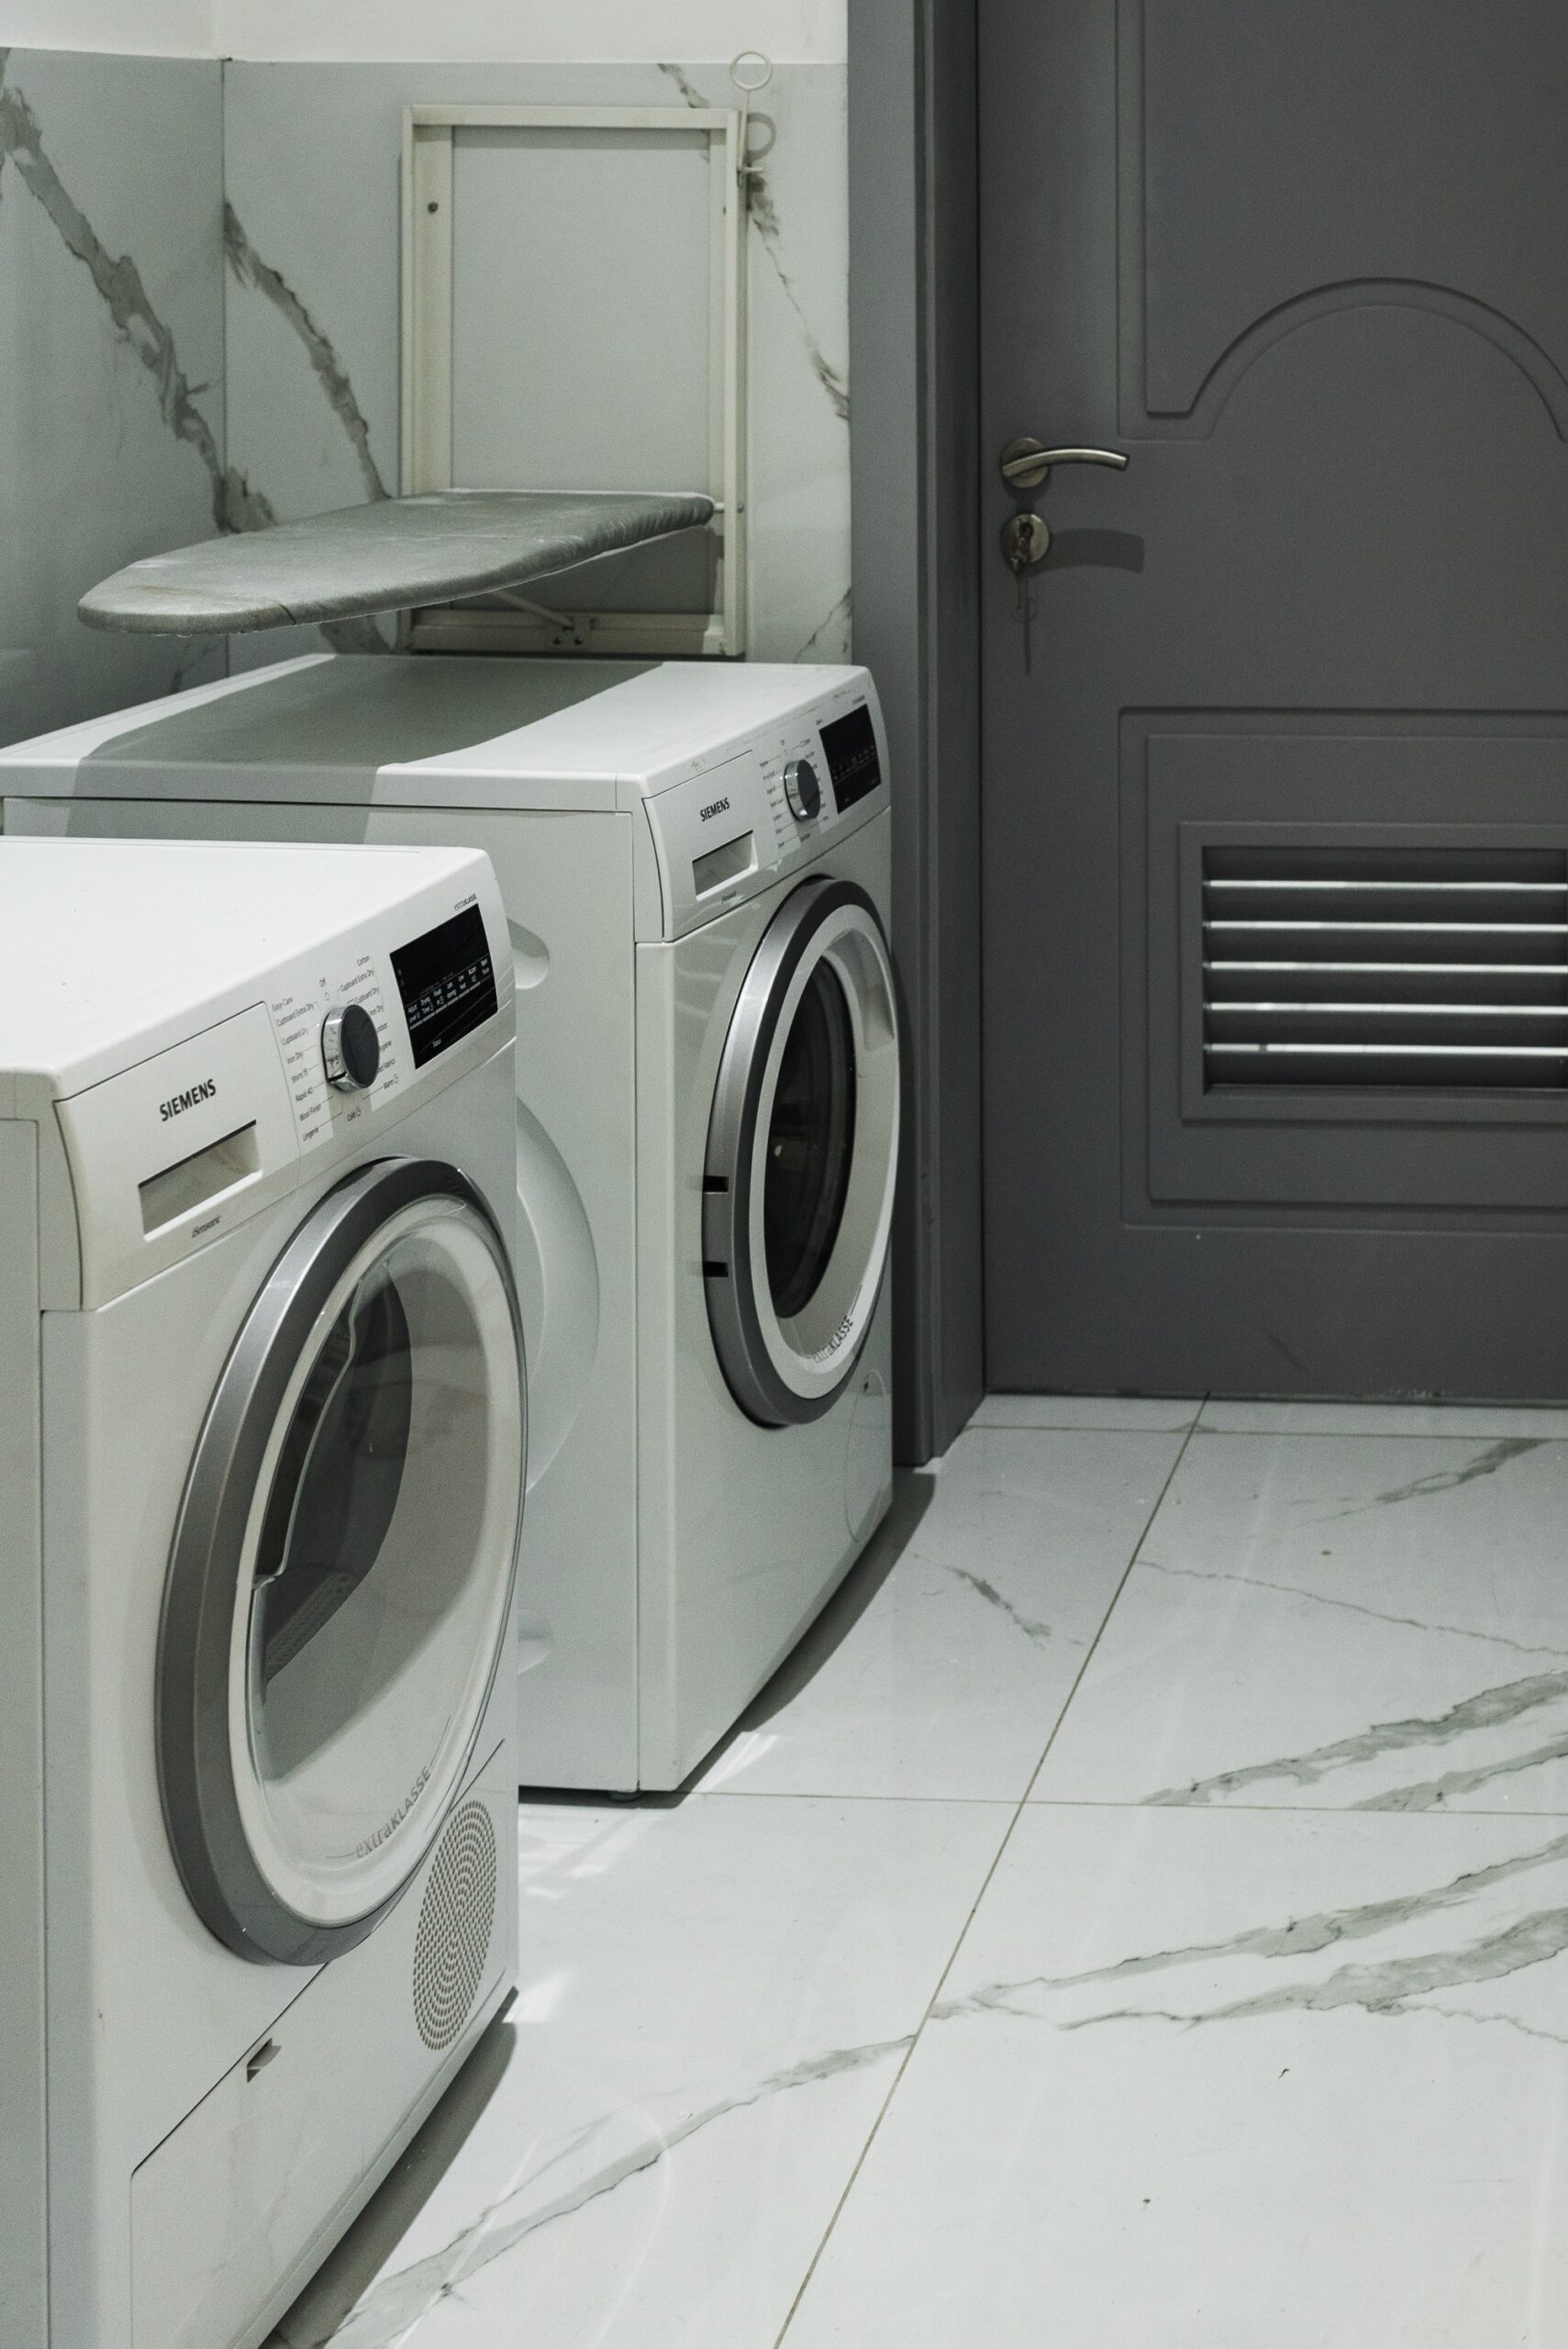 A closeup of a washer and dryer